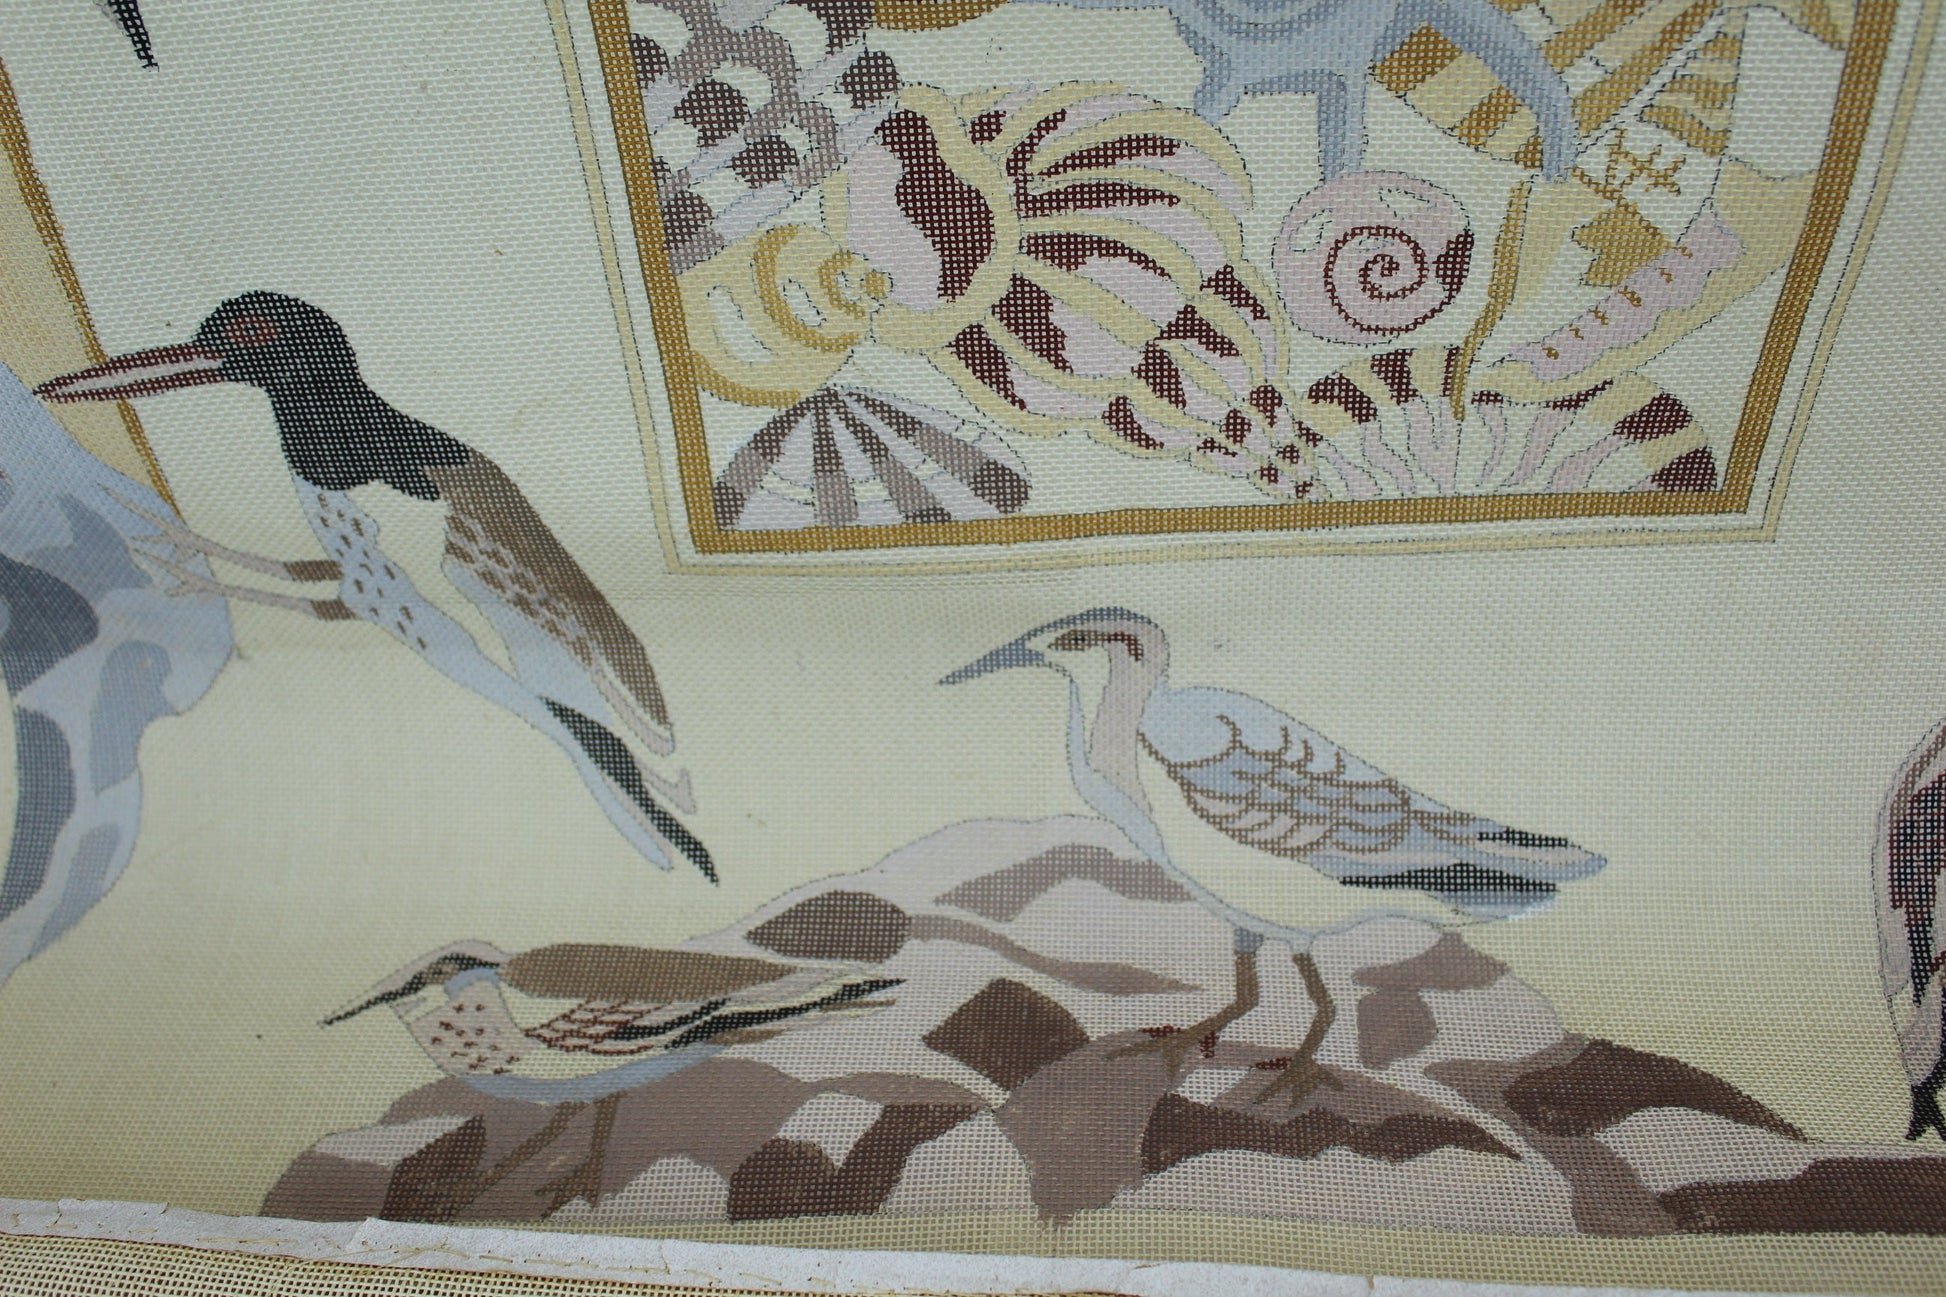 Hand Painted Signed Zuber 1979 Rug Canvas Needlepoint Coastal Sandpipers Shells 40" X 48" beach scene rug